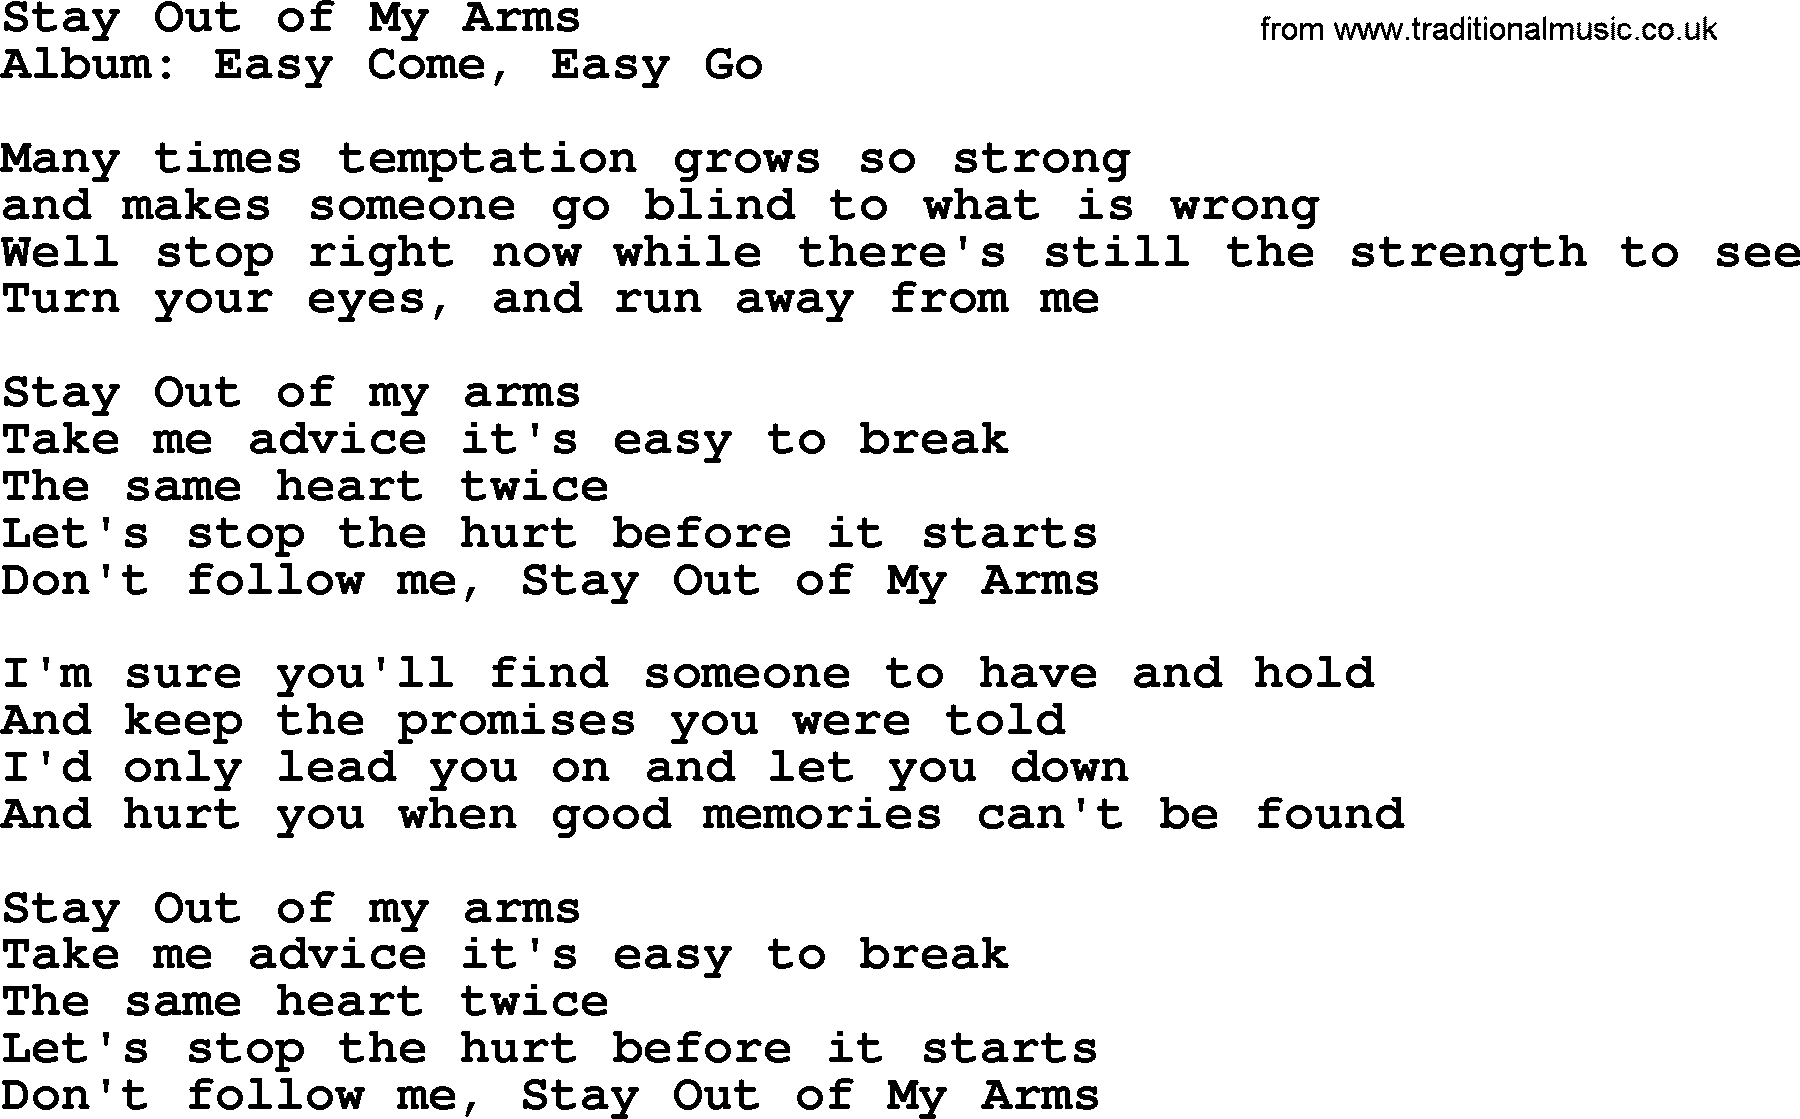 George Strait song: Stay Out of My Arms, lyrics